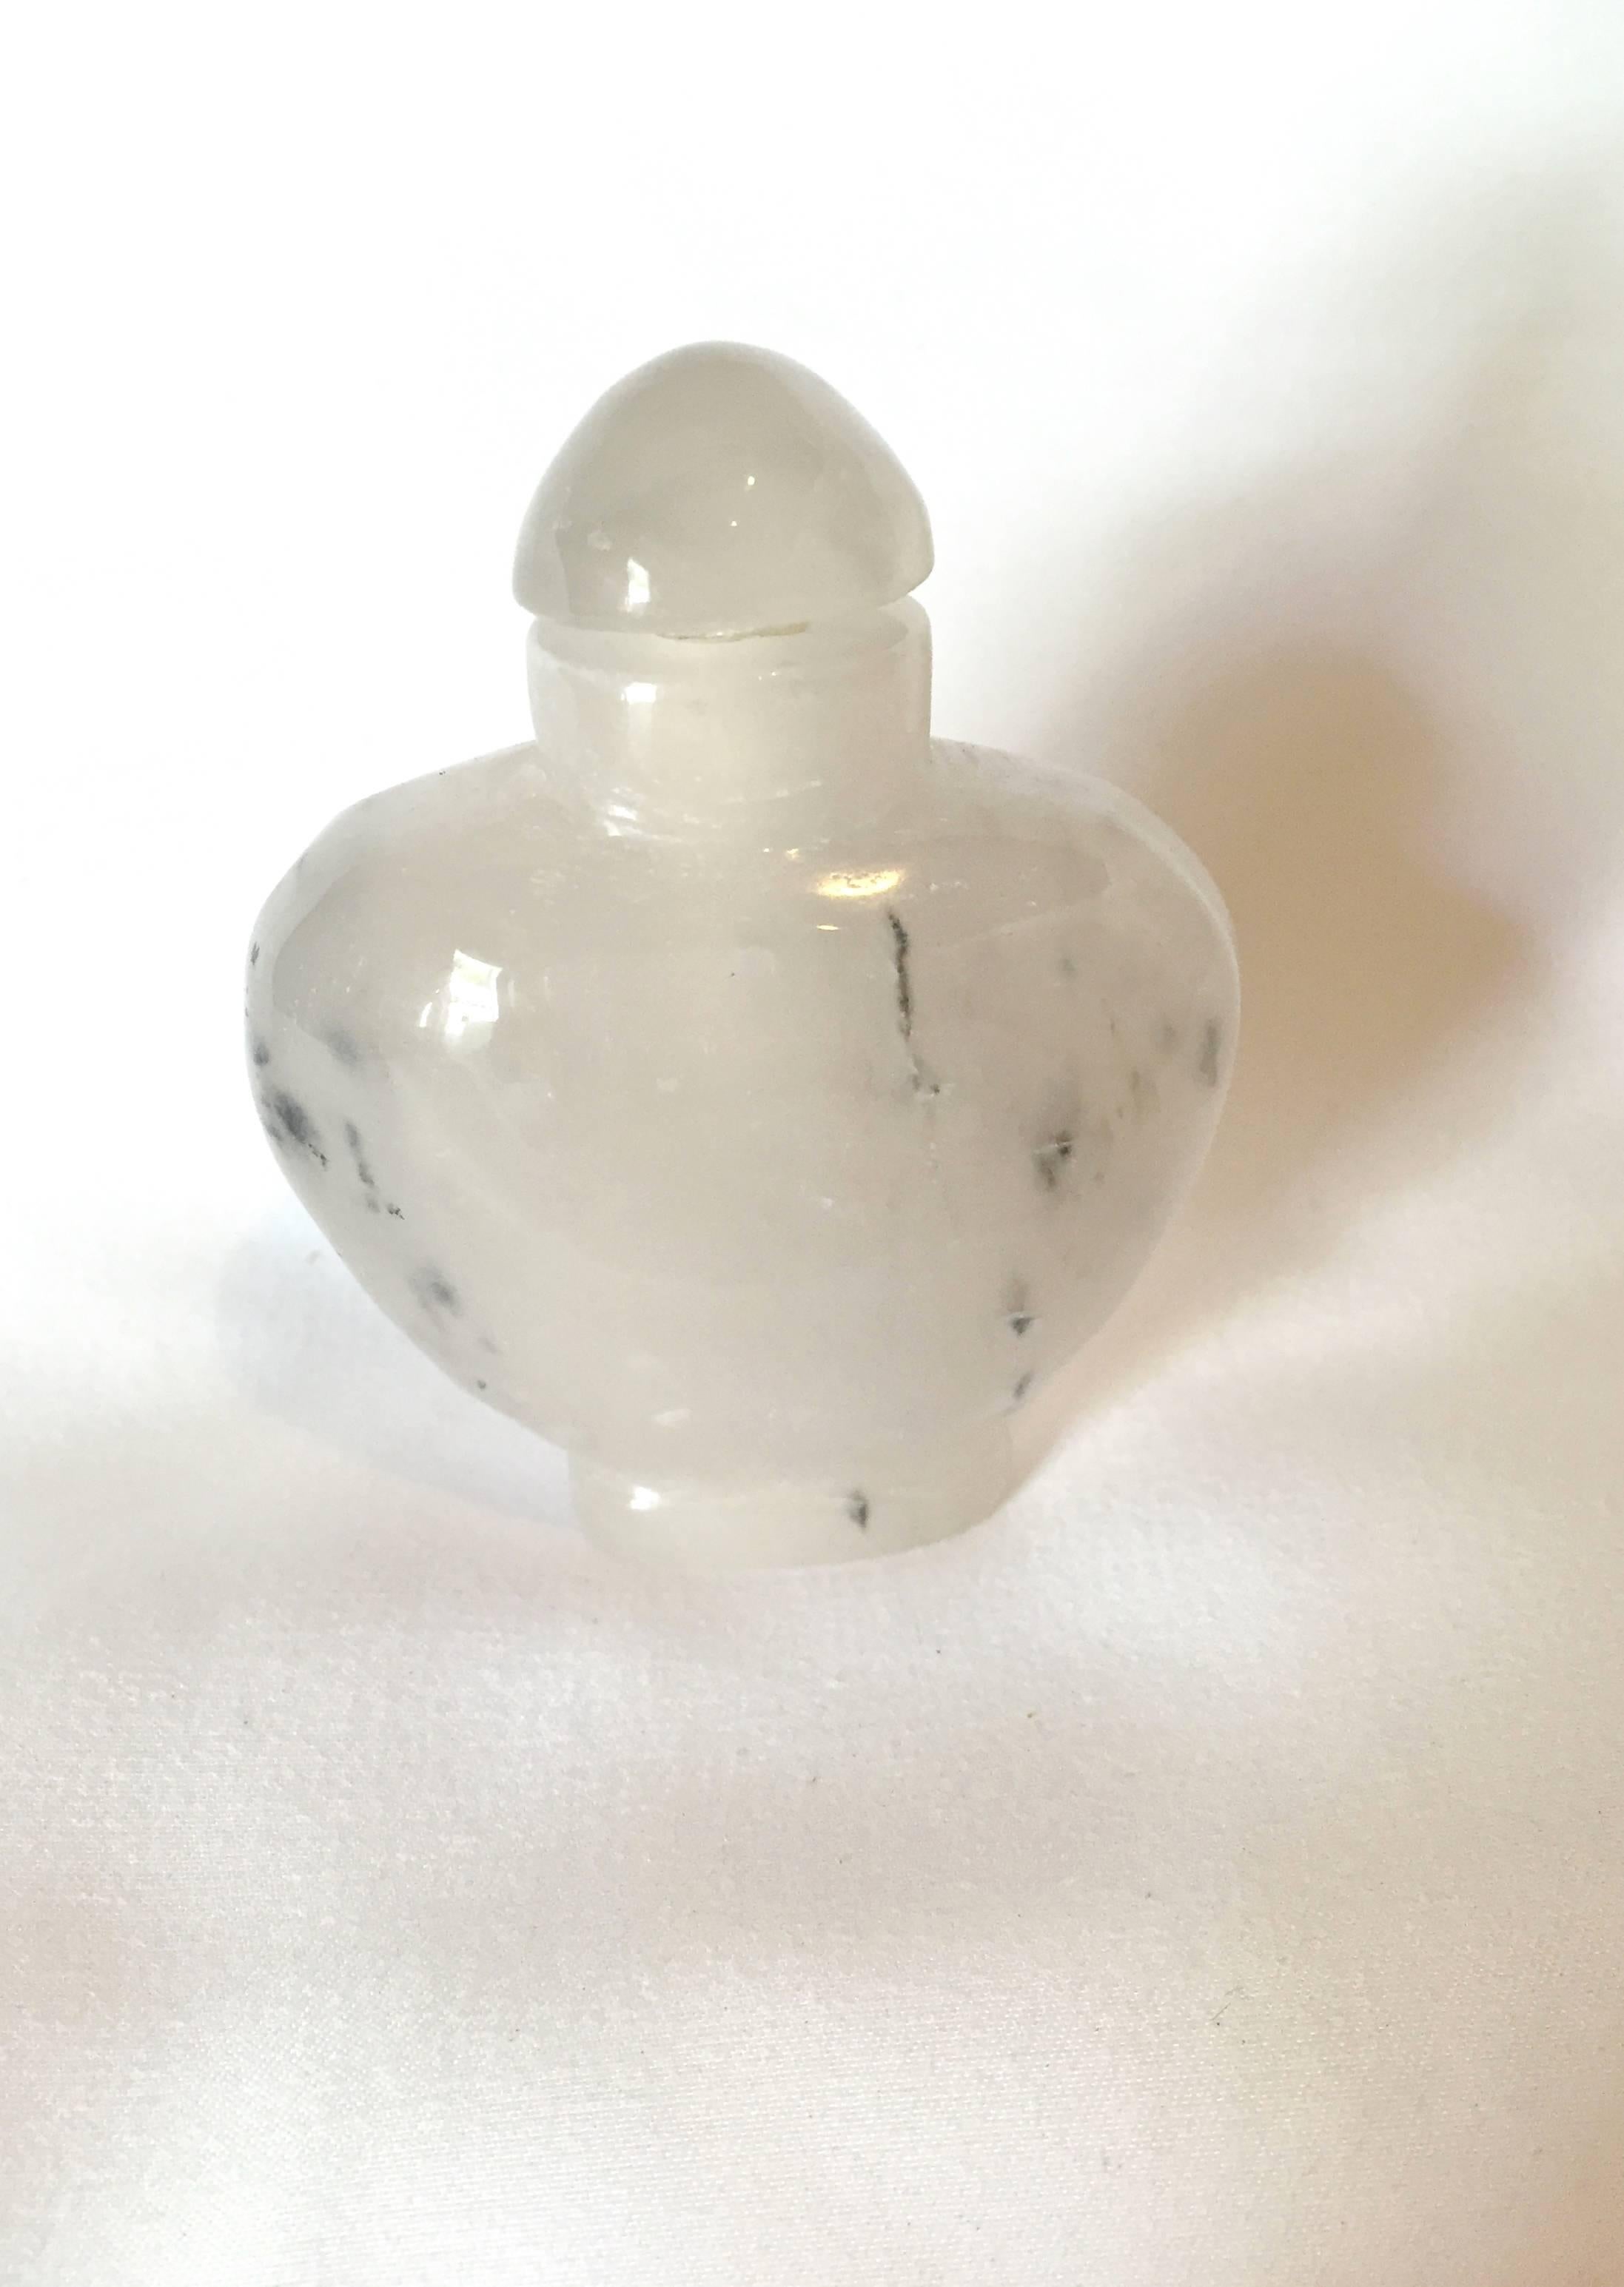 This romantic piece is carved from the beautiful moss agate. With the natural inclusions that resemble white clouds and black bamboos, the bottle looks like an abstract watercolor painting. The stone is polished skilfully to a beautiful lustre. A